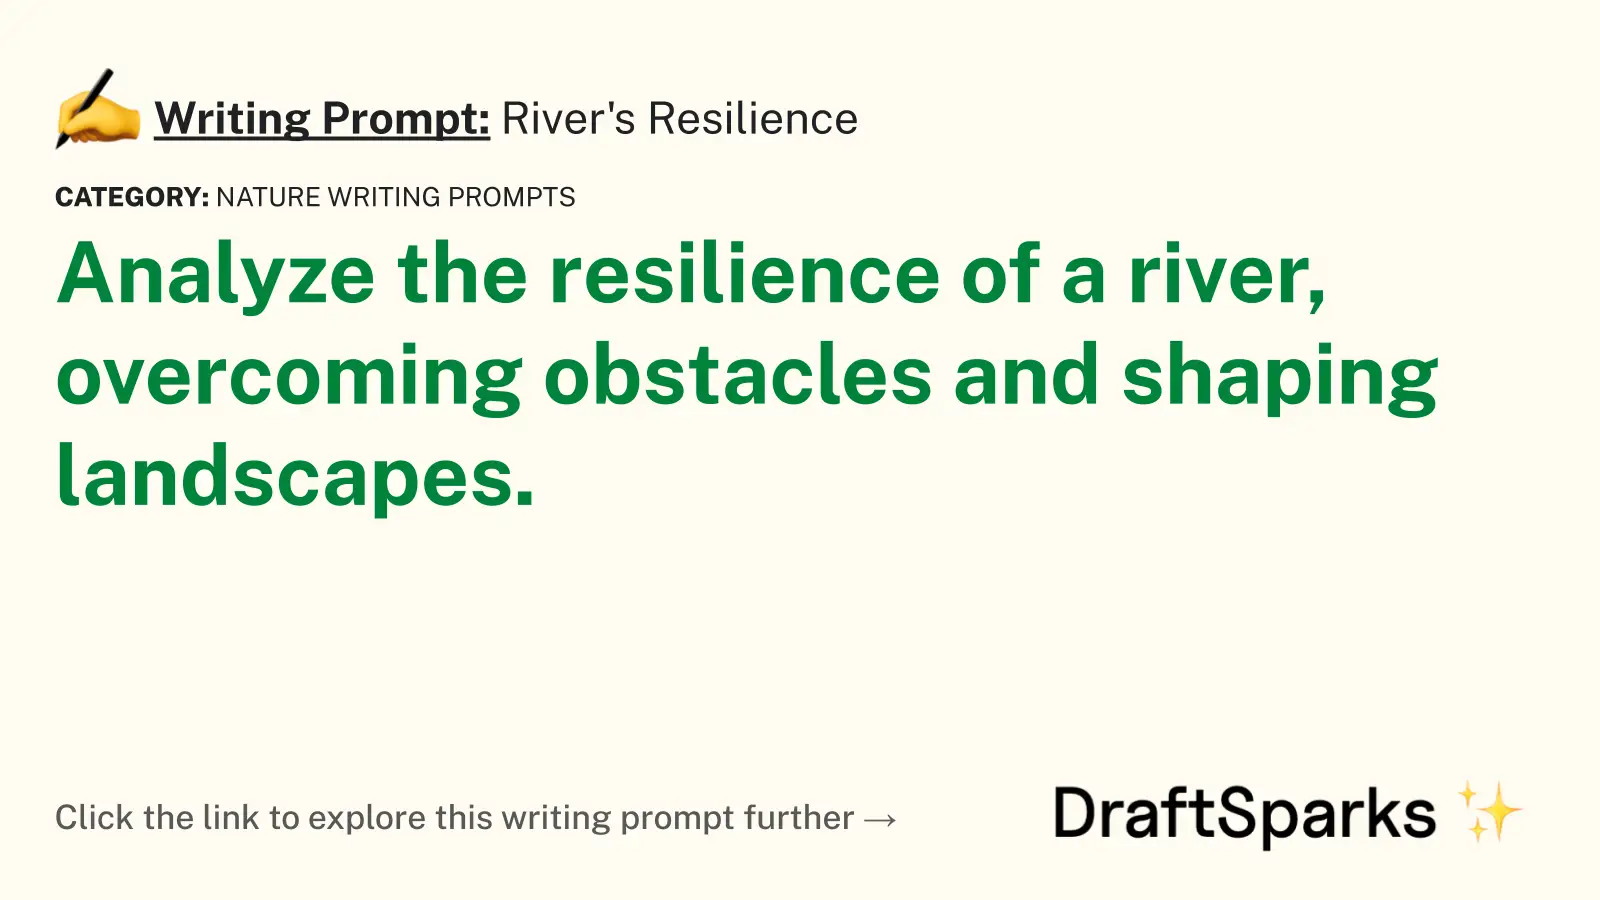 River’s Resilience